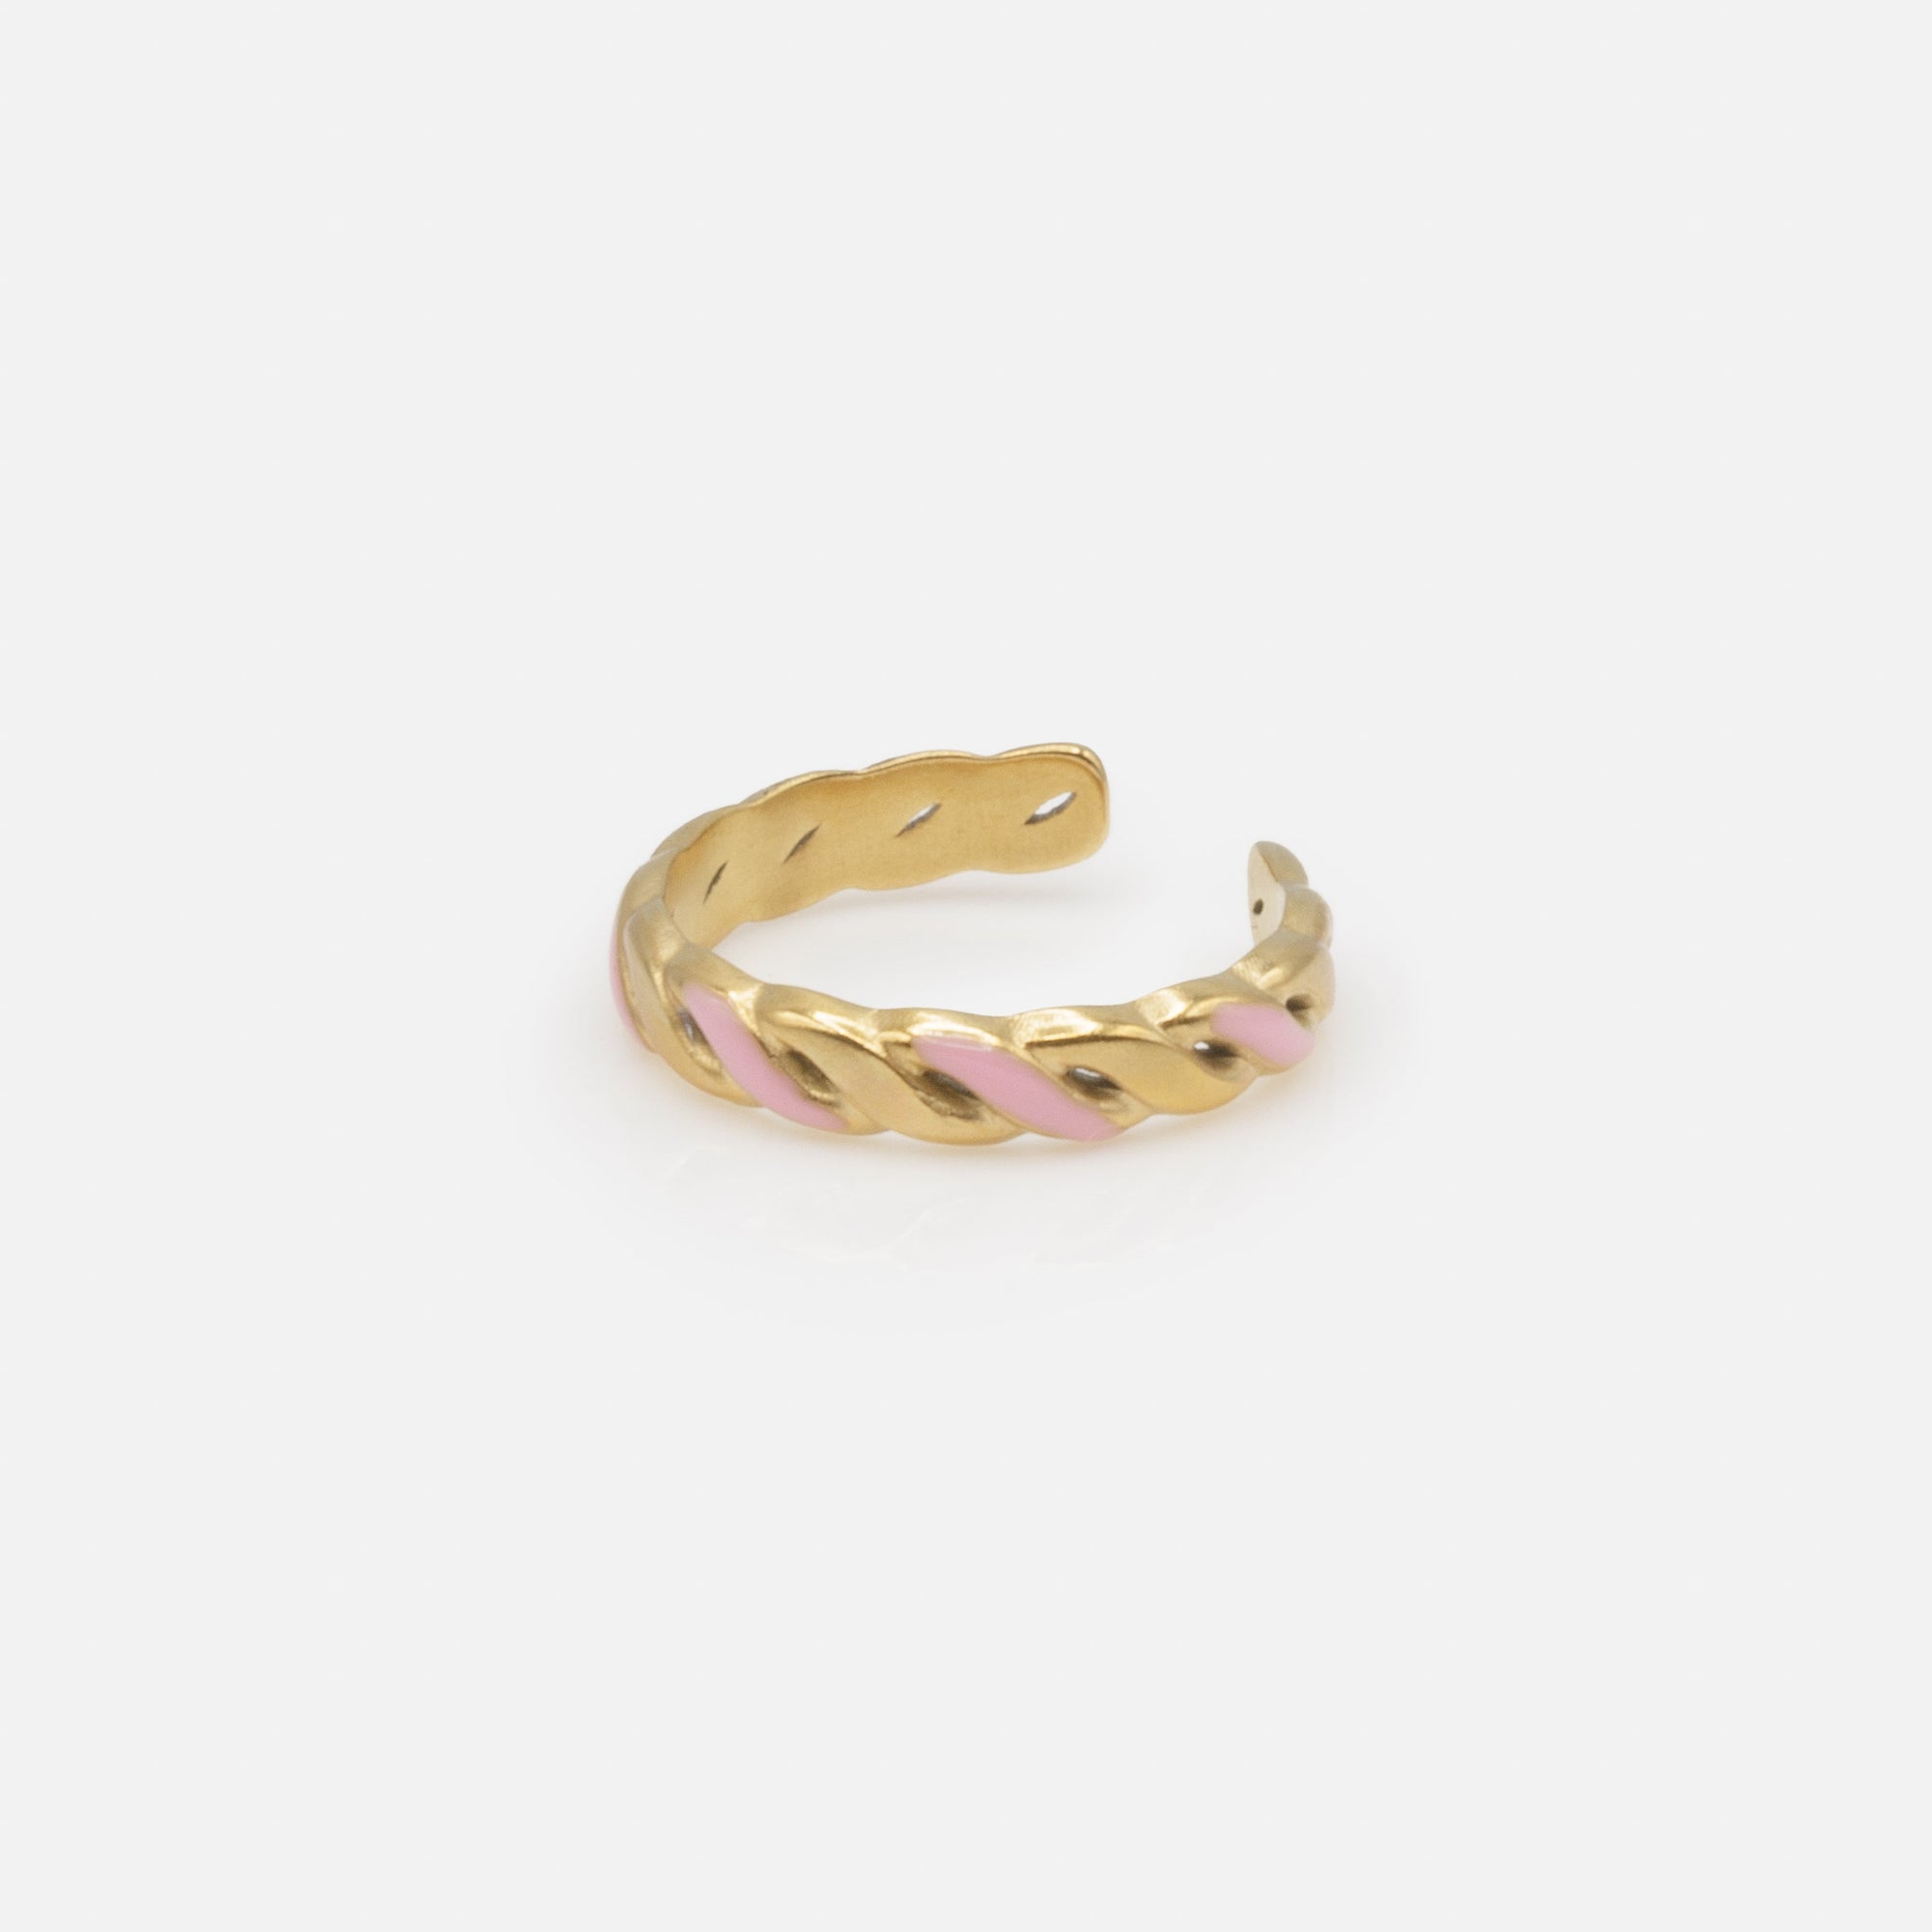 Twisted gold ring with rose stainless steel additions